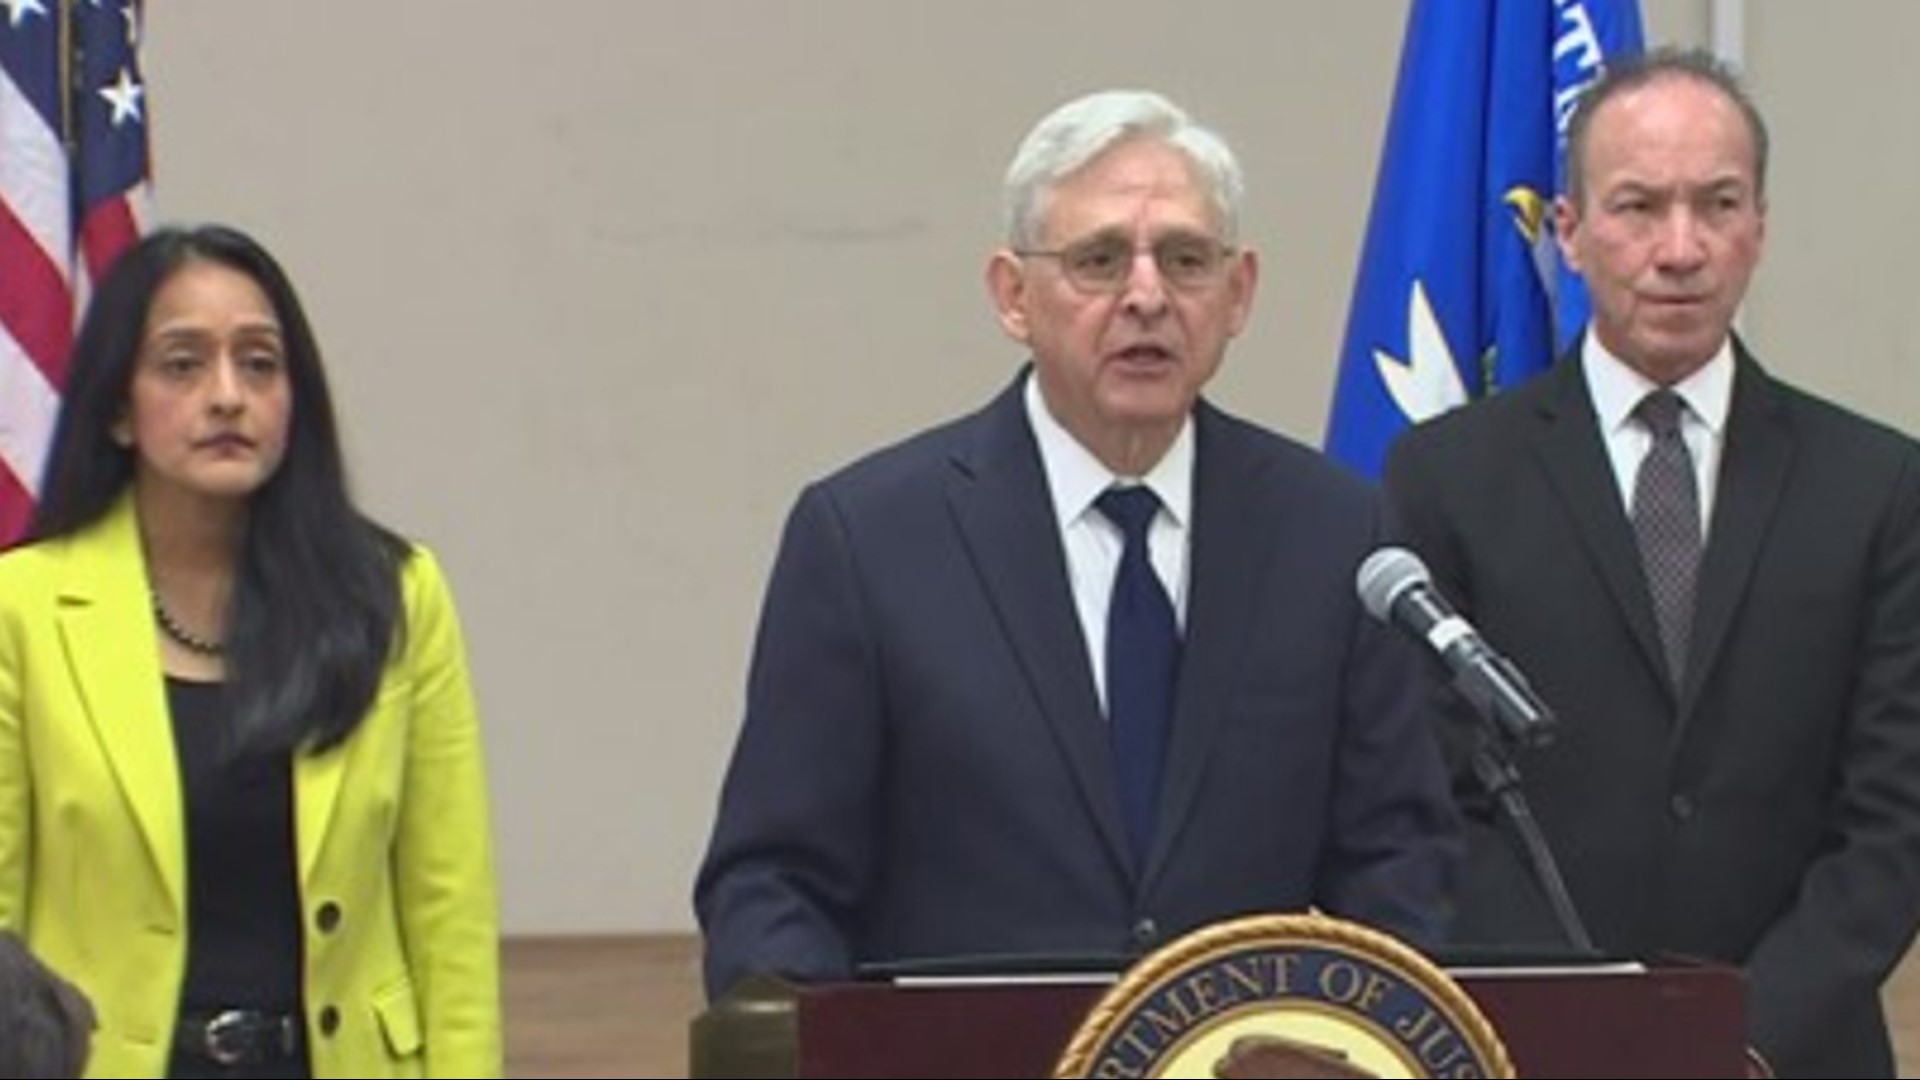 U.S. Attorney General Merrick Garland spoke on the findings of the report released Thursday morning.